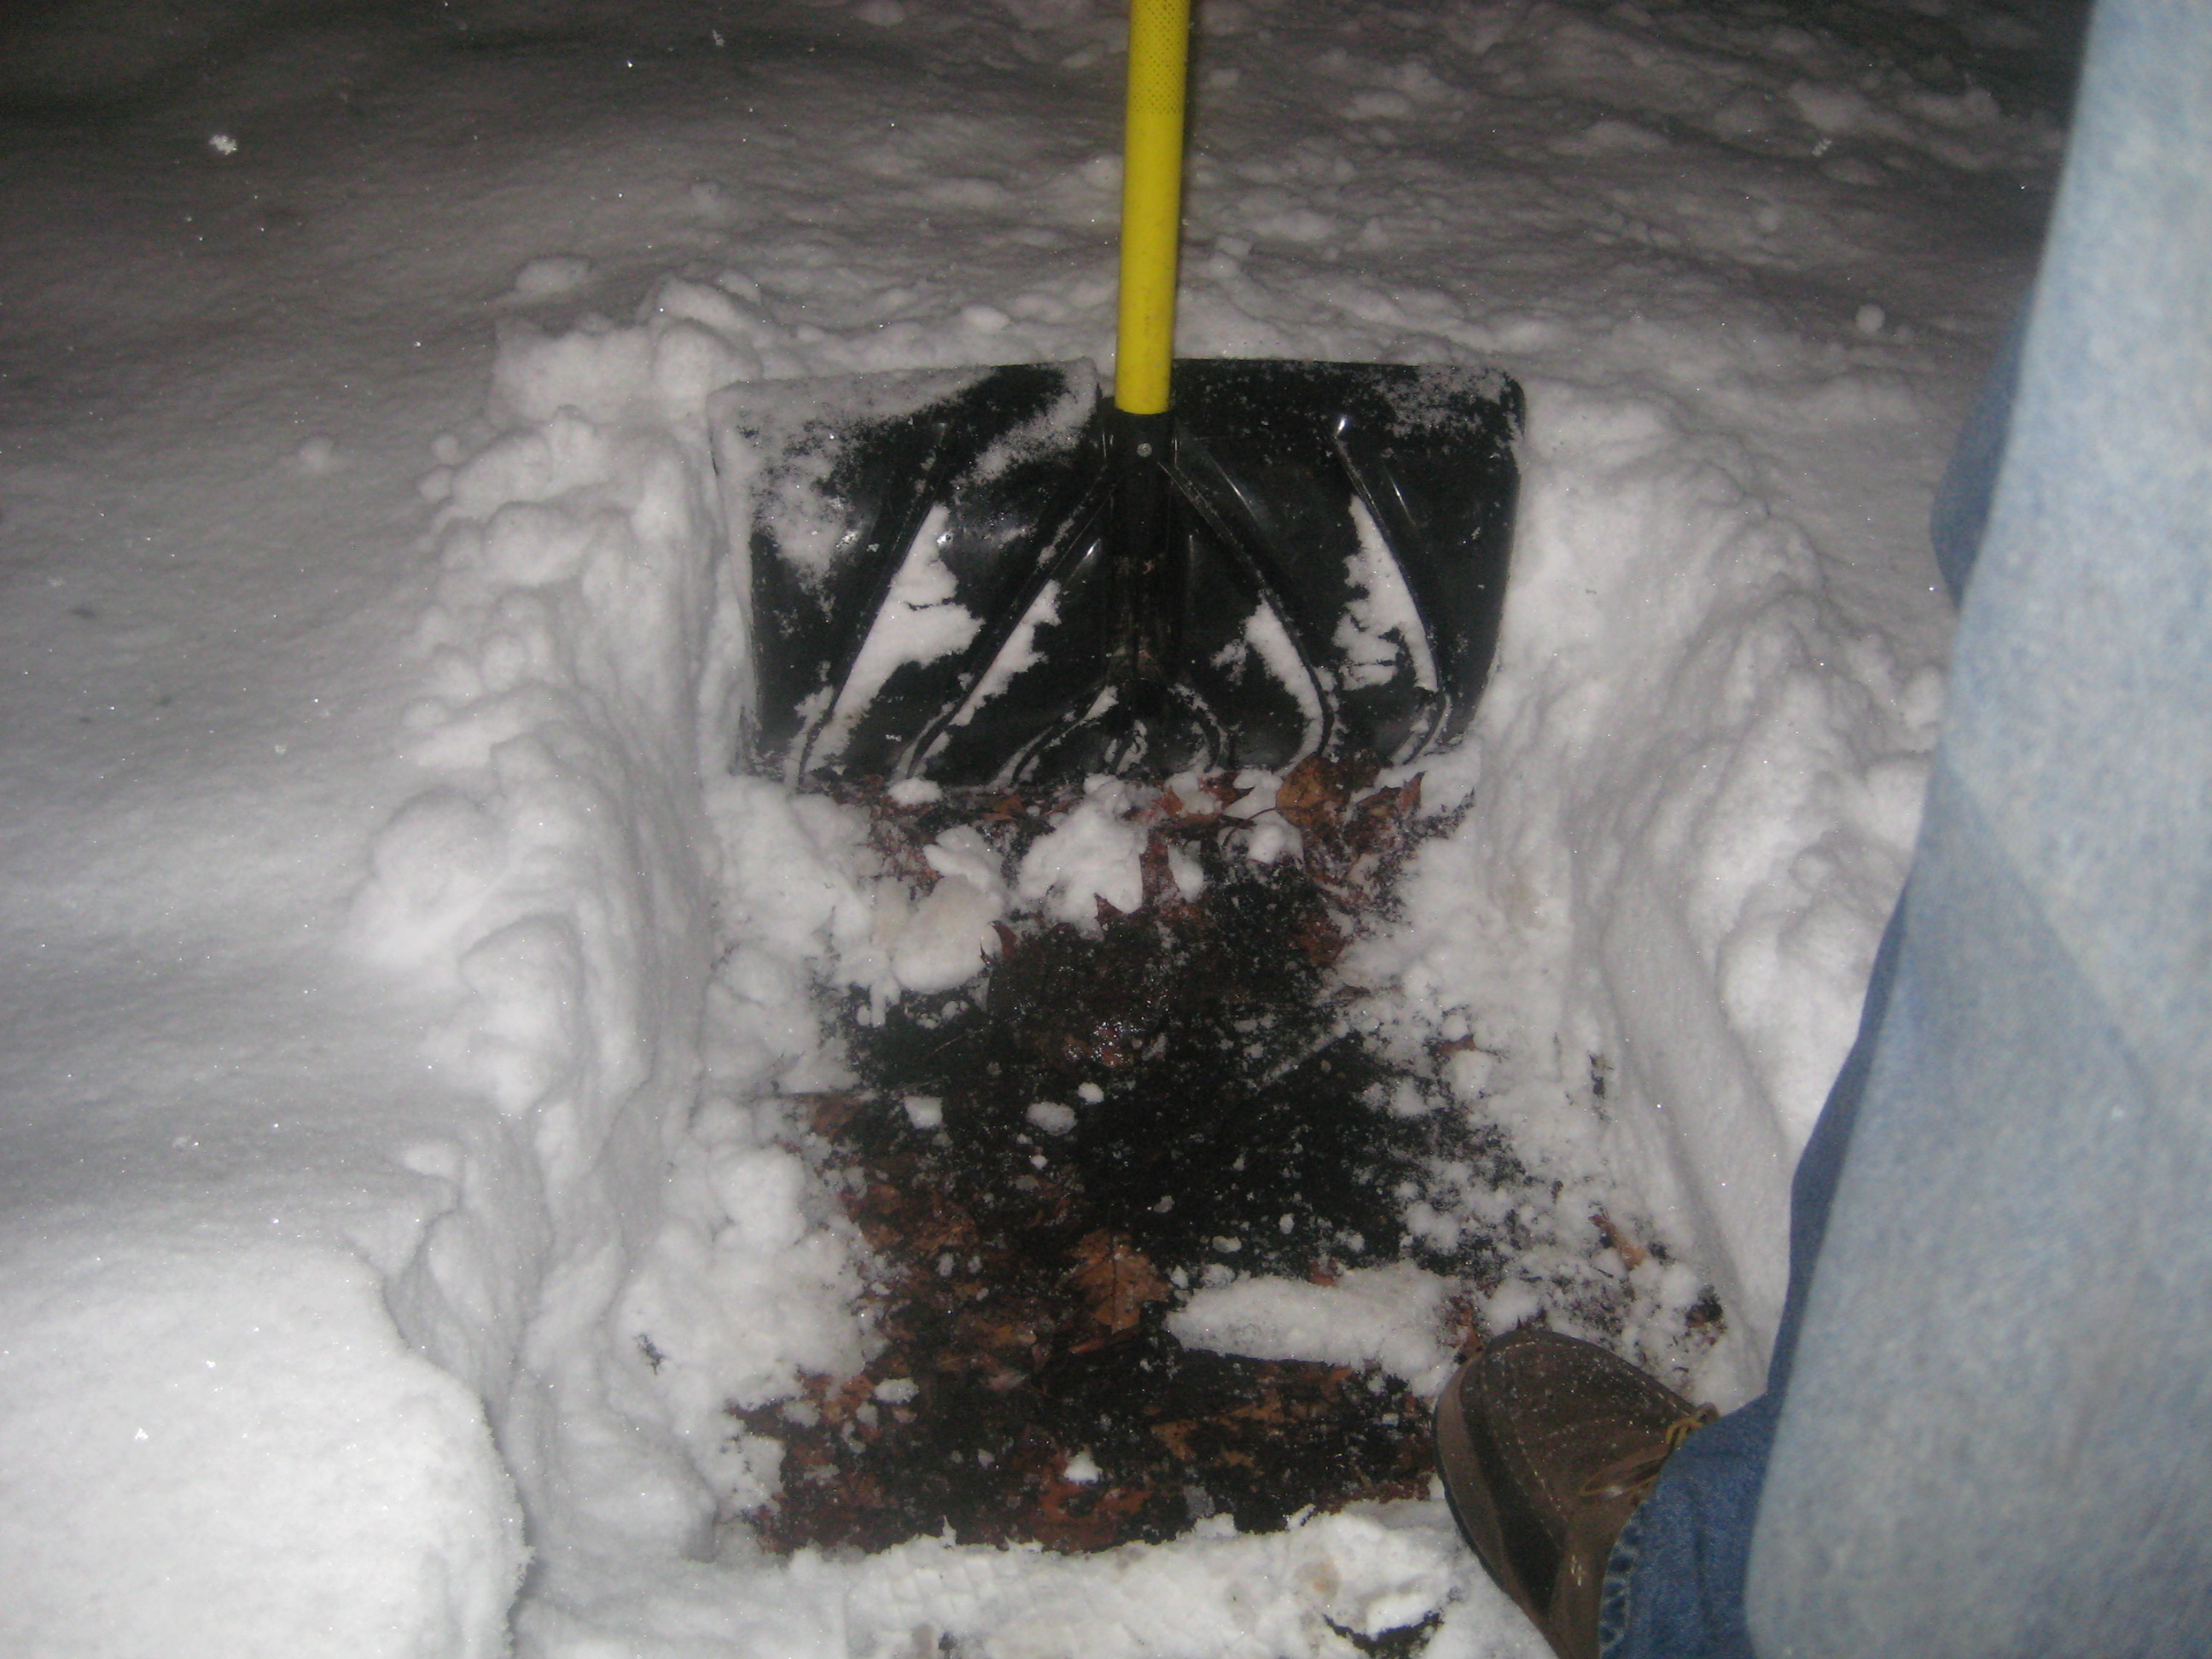 The snow reached the top of the shovel.